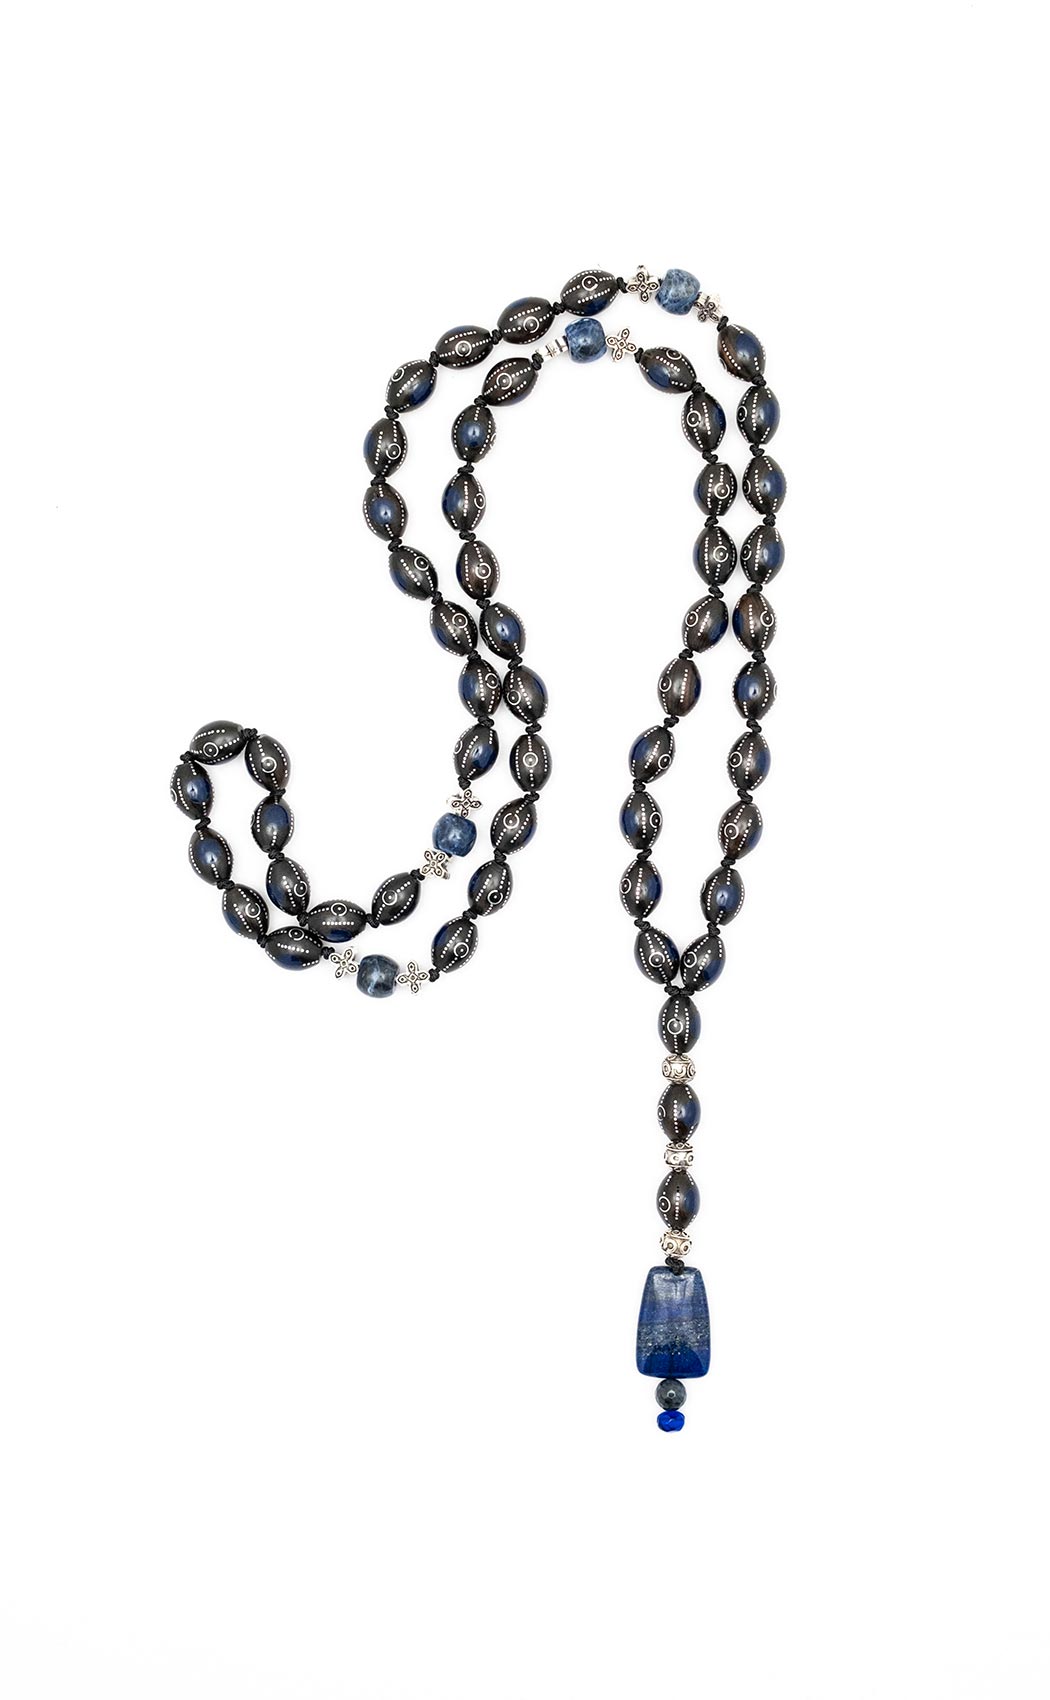 Catholic Prayer Beads (Rozary) from ebony with artificial resin, Dendrites, Tiger Eye and Tin